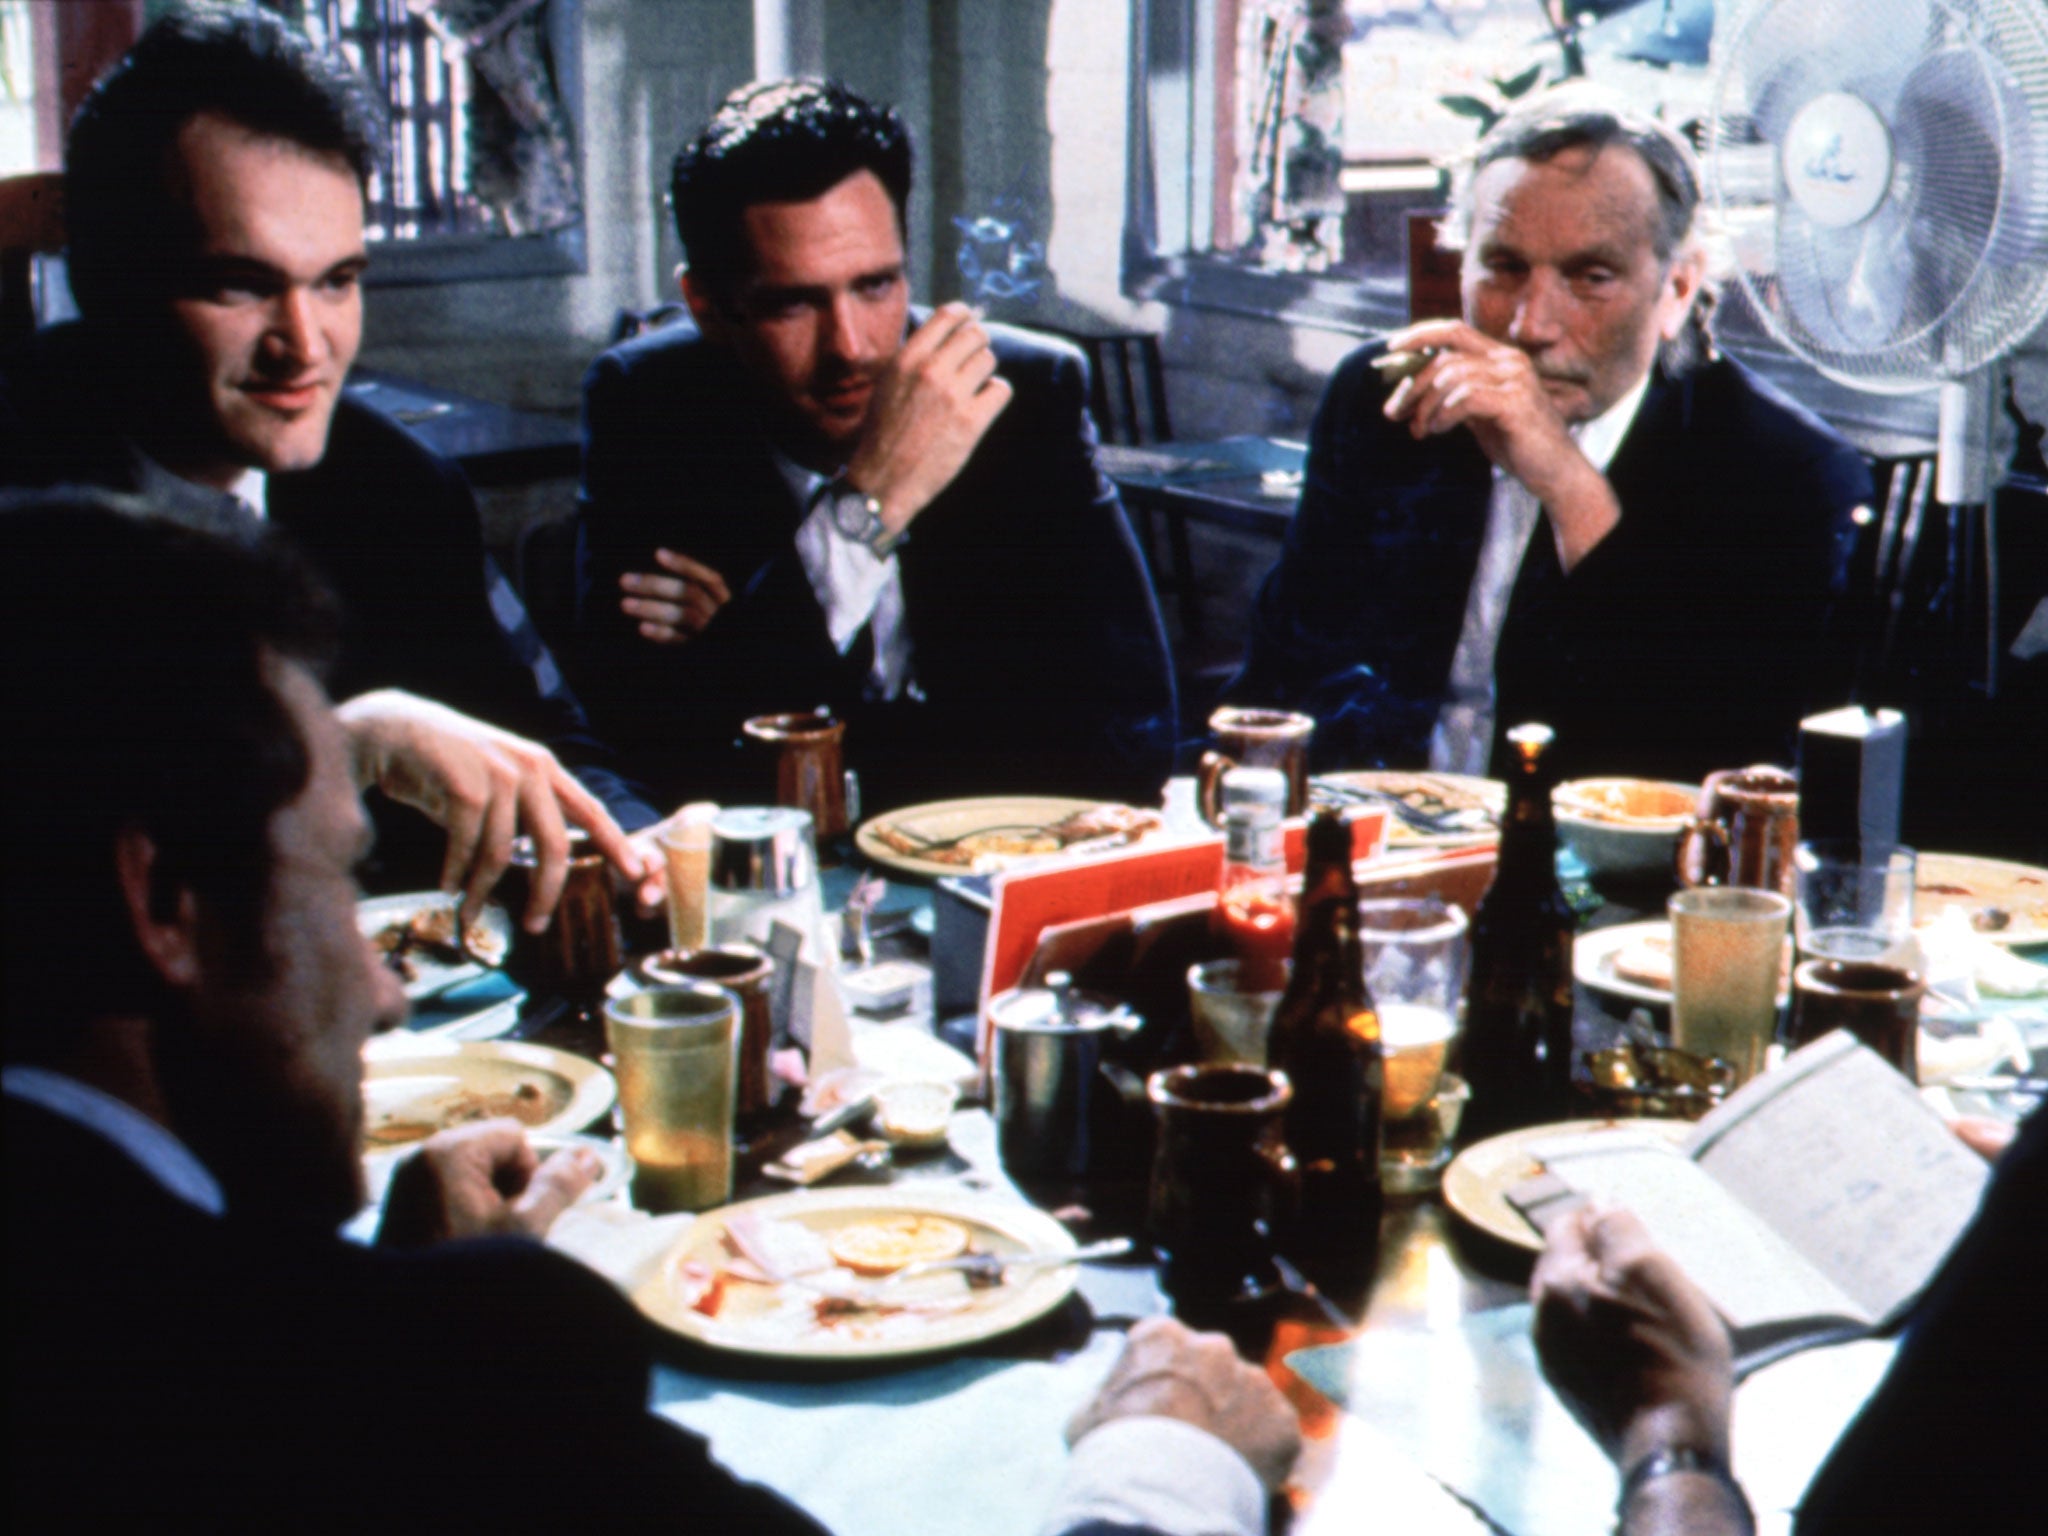 Dog days: Quentin Tarantino (left) with Michael Madsen next to him in a scene from Reservoir Dogs